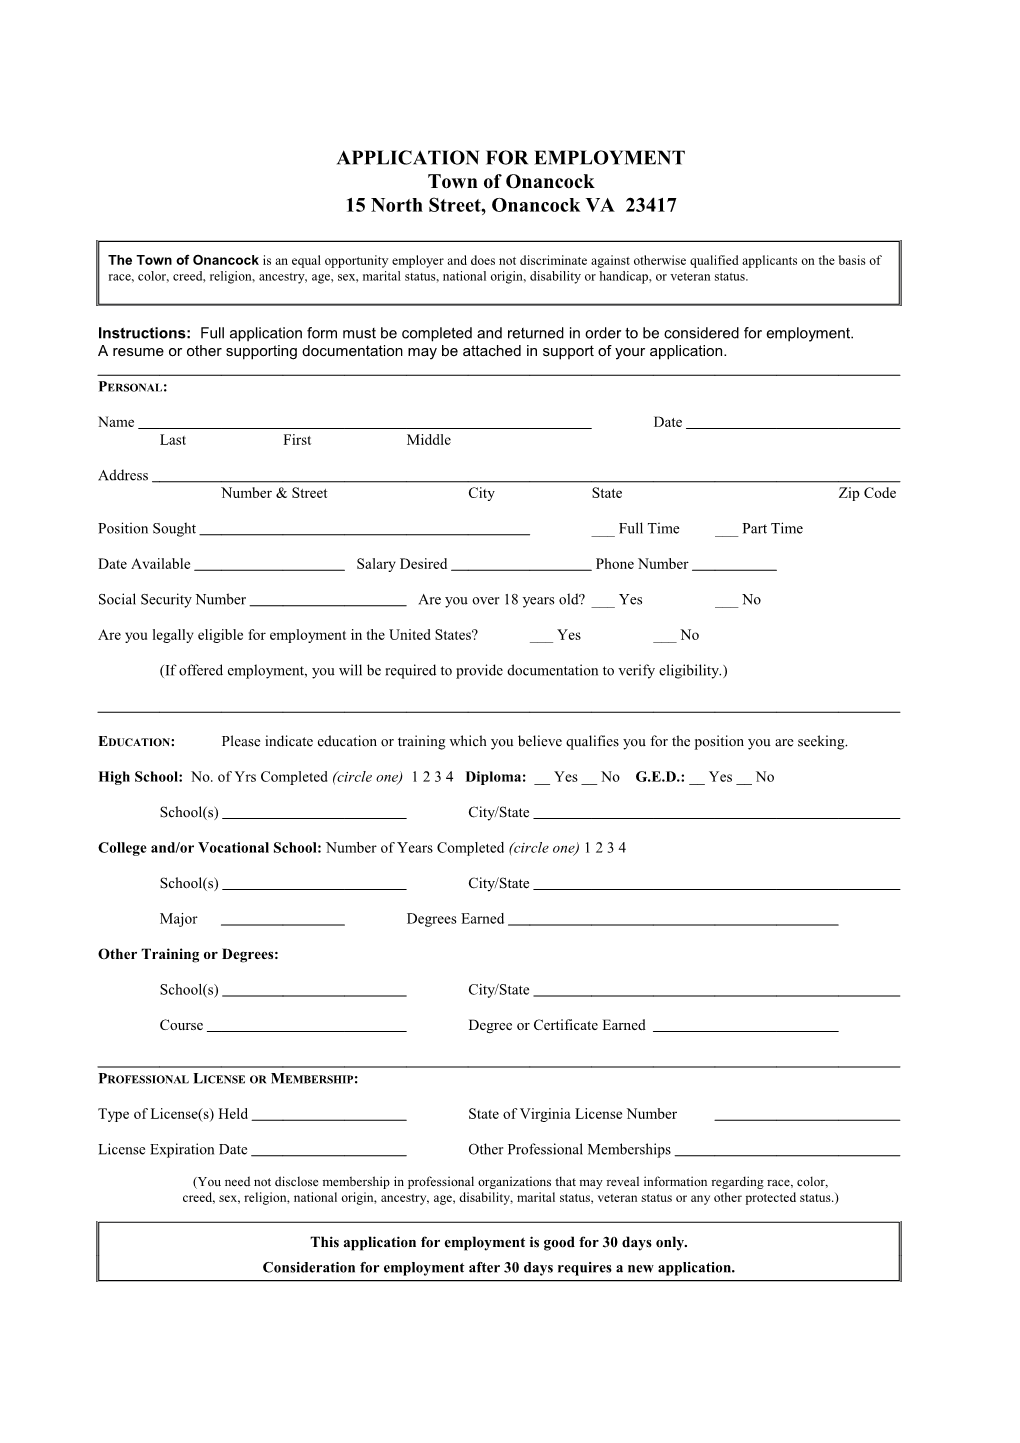 Application for Employment s153